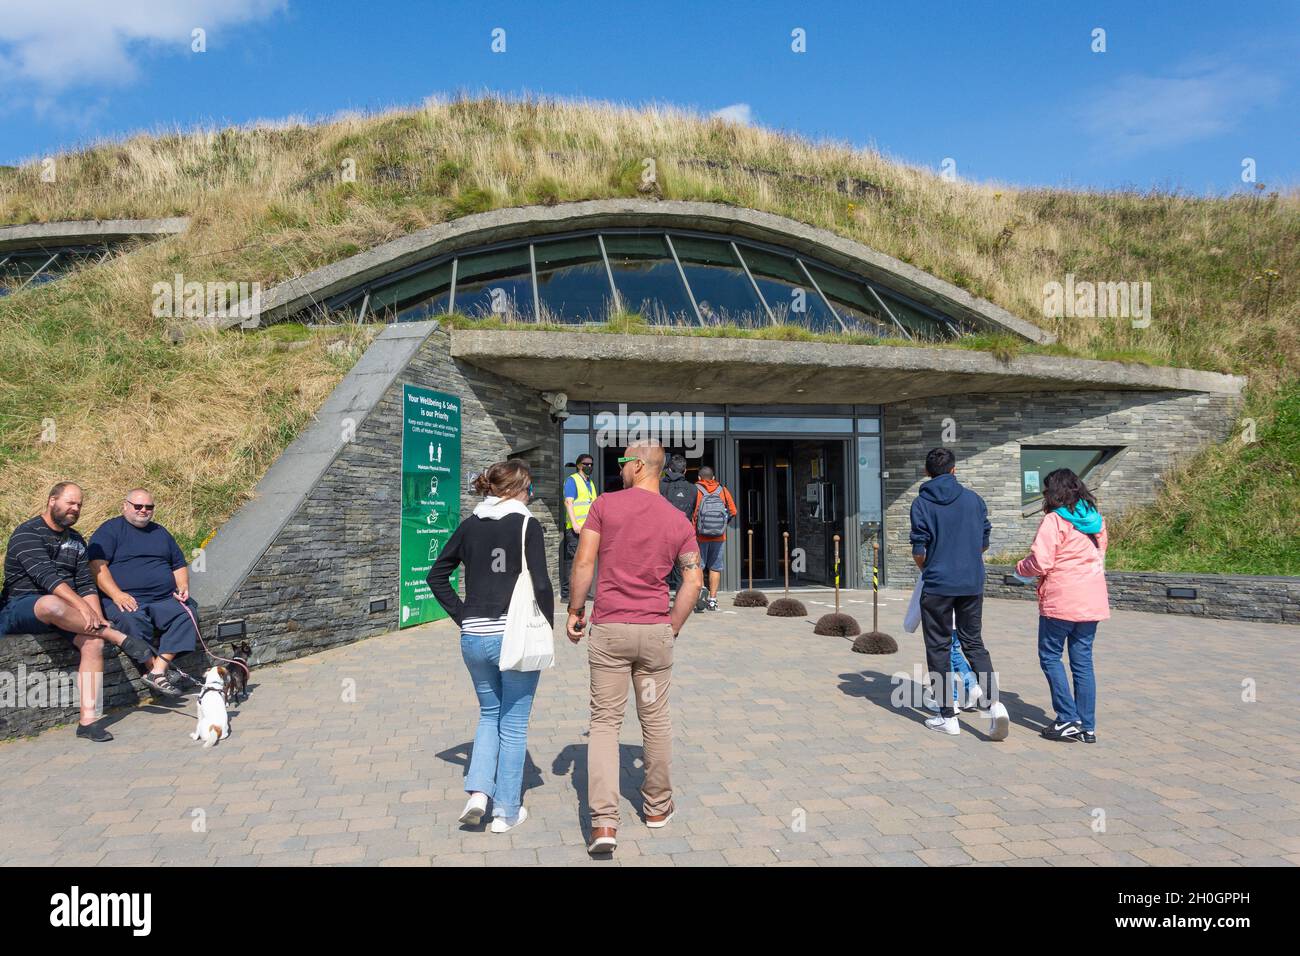 Entrance to underground Visitor Centre, Cliffs of Moher (Aillte an Mhothair), Lahinch, County Clare, Republic of Ireland Stock Photo